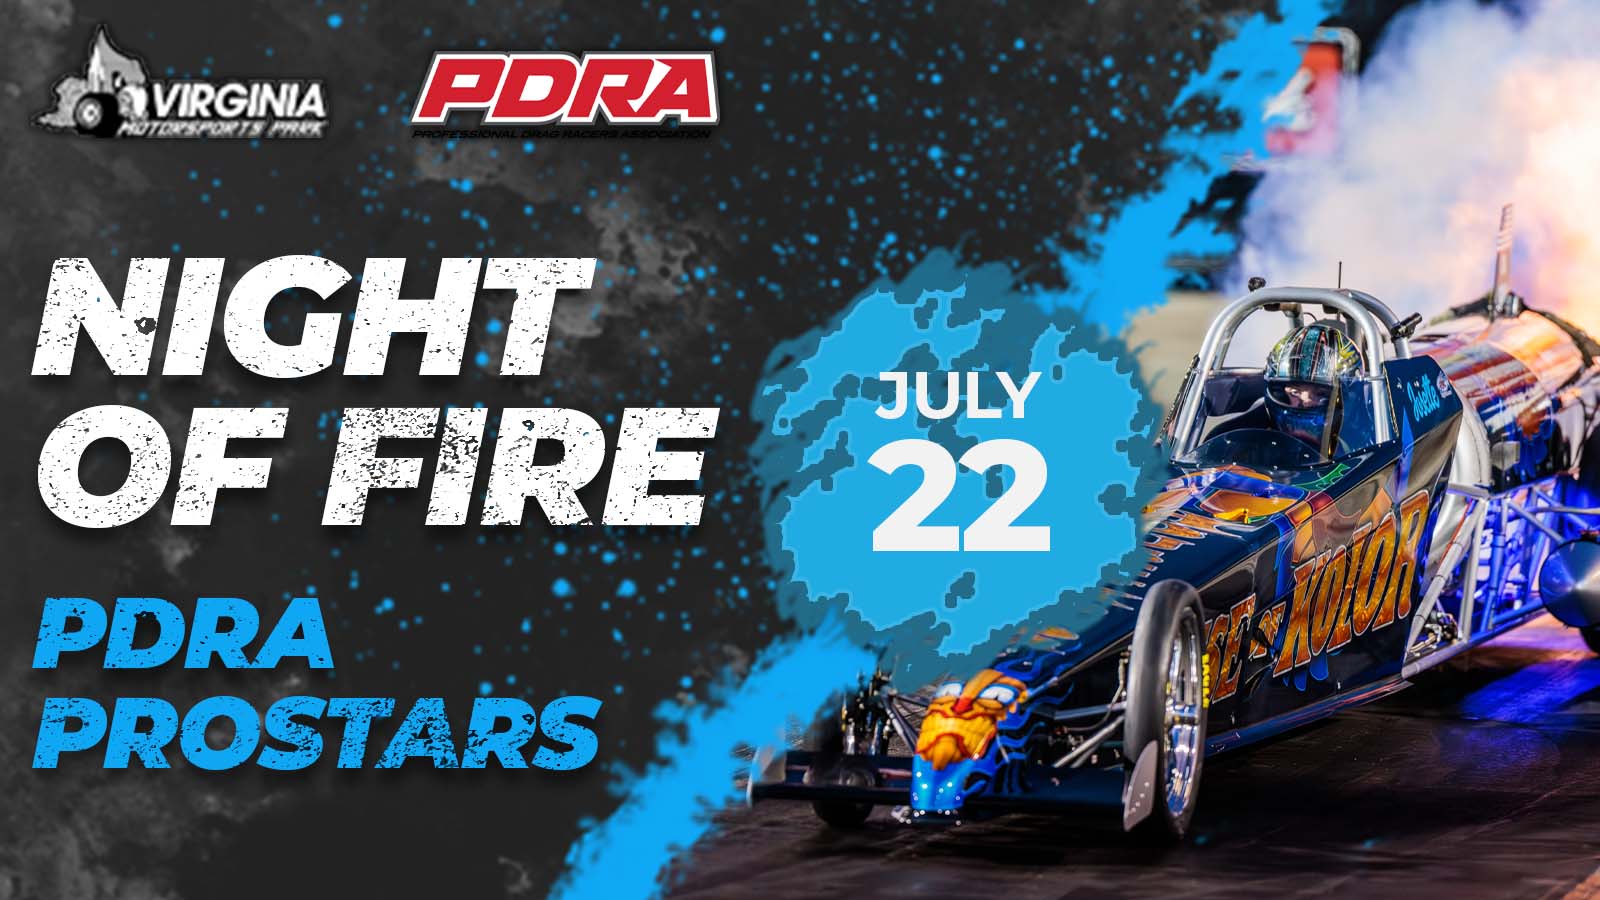 Summit Racing PDRA ProStars, Top Fuel, Country Music Stars to Light Up VMP’s Night of Fire